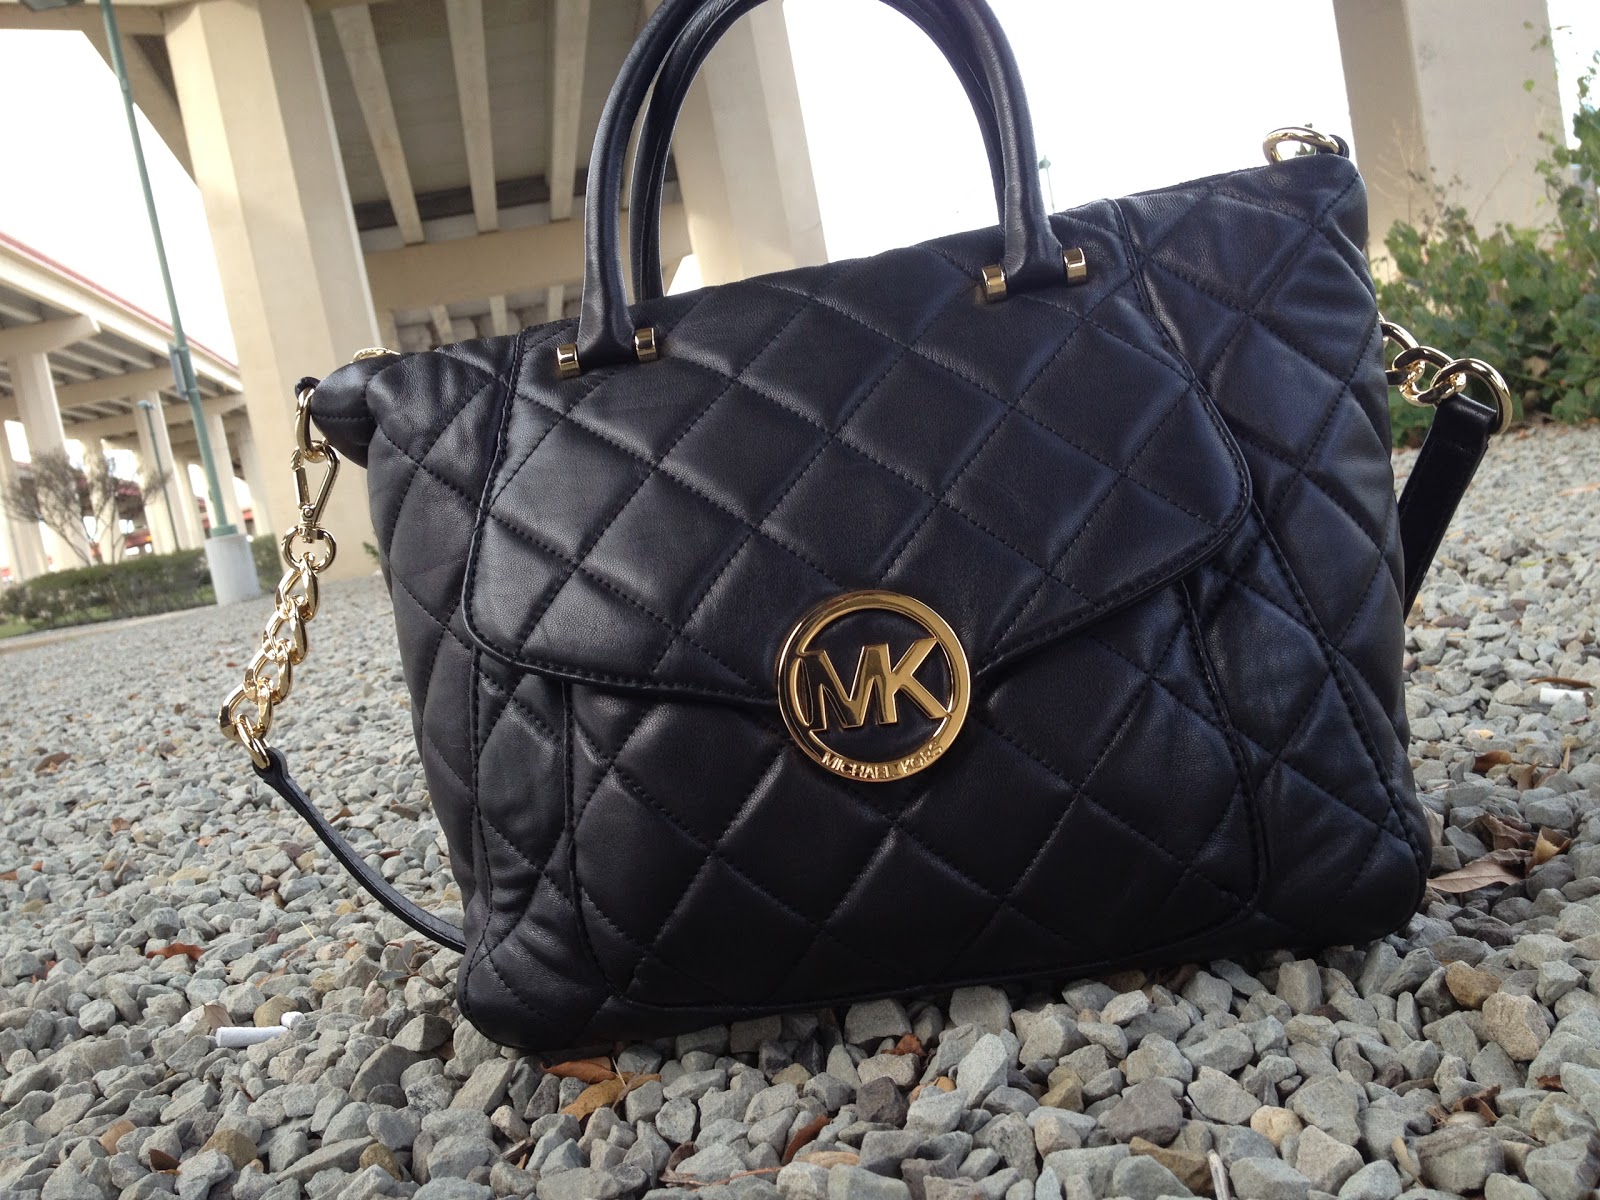 Handbag Review: MICHAEL MICHAEL KORS Fulton Quilted Leather Satchel |  Daydreaming Maven